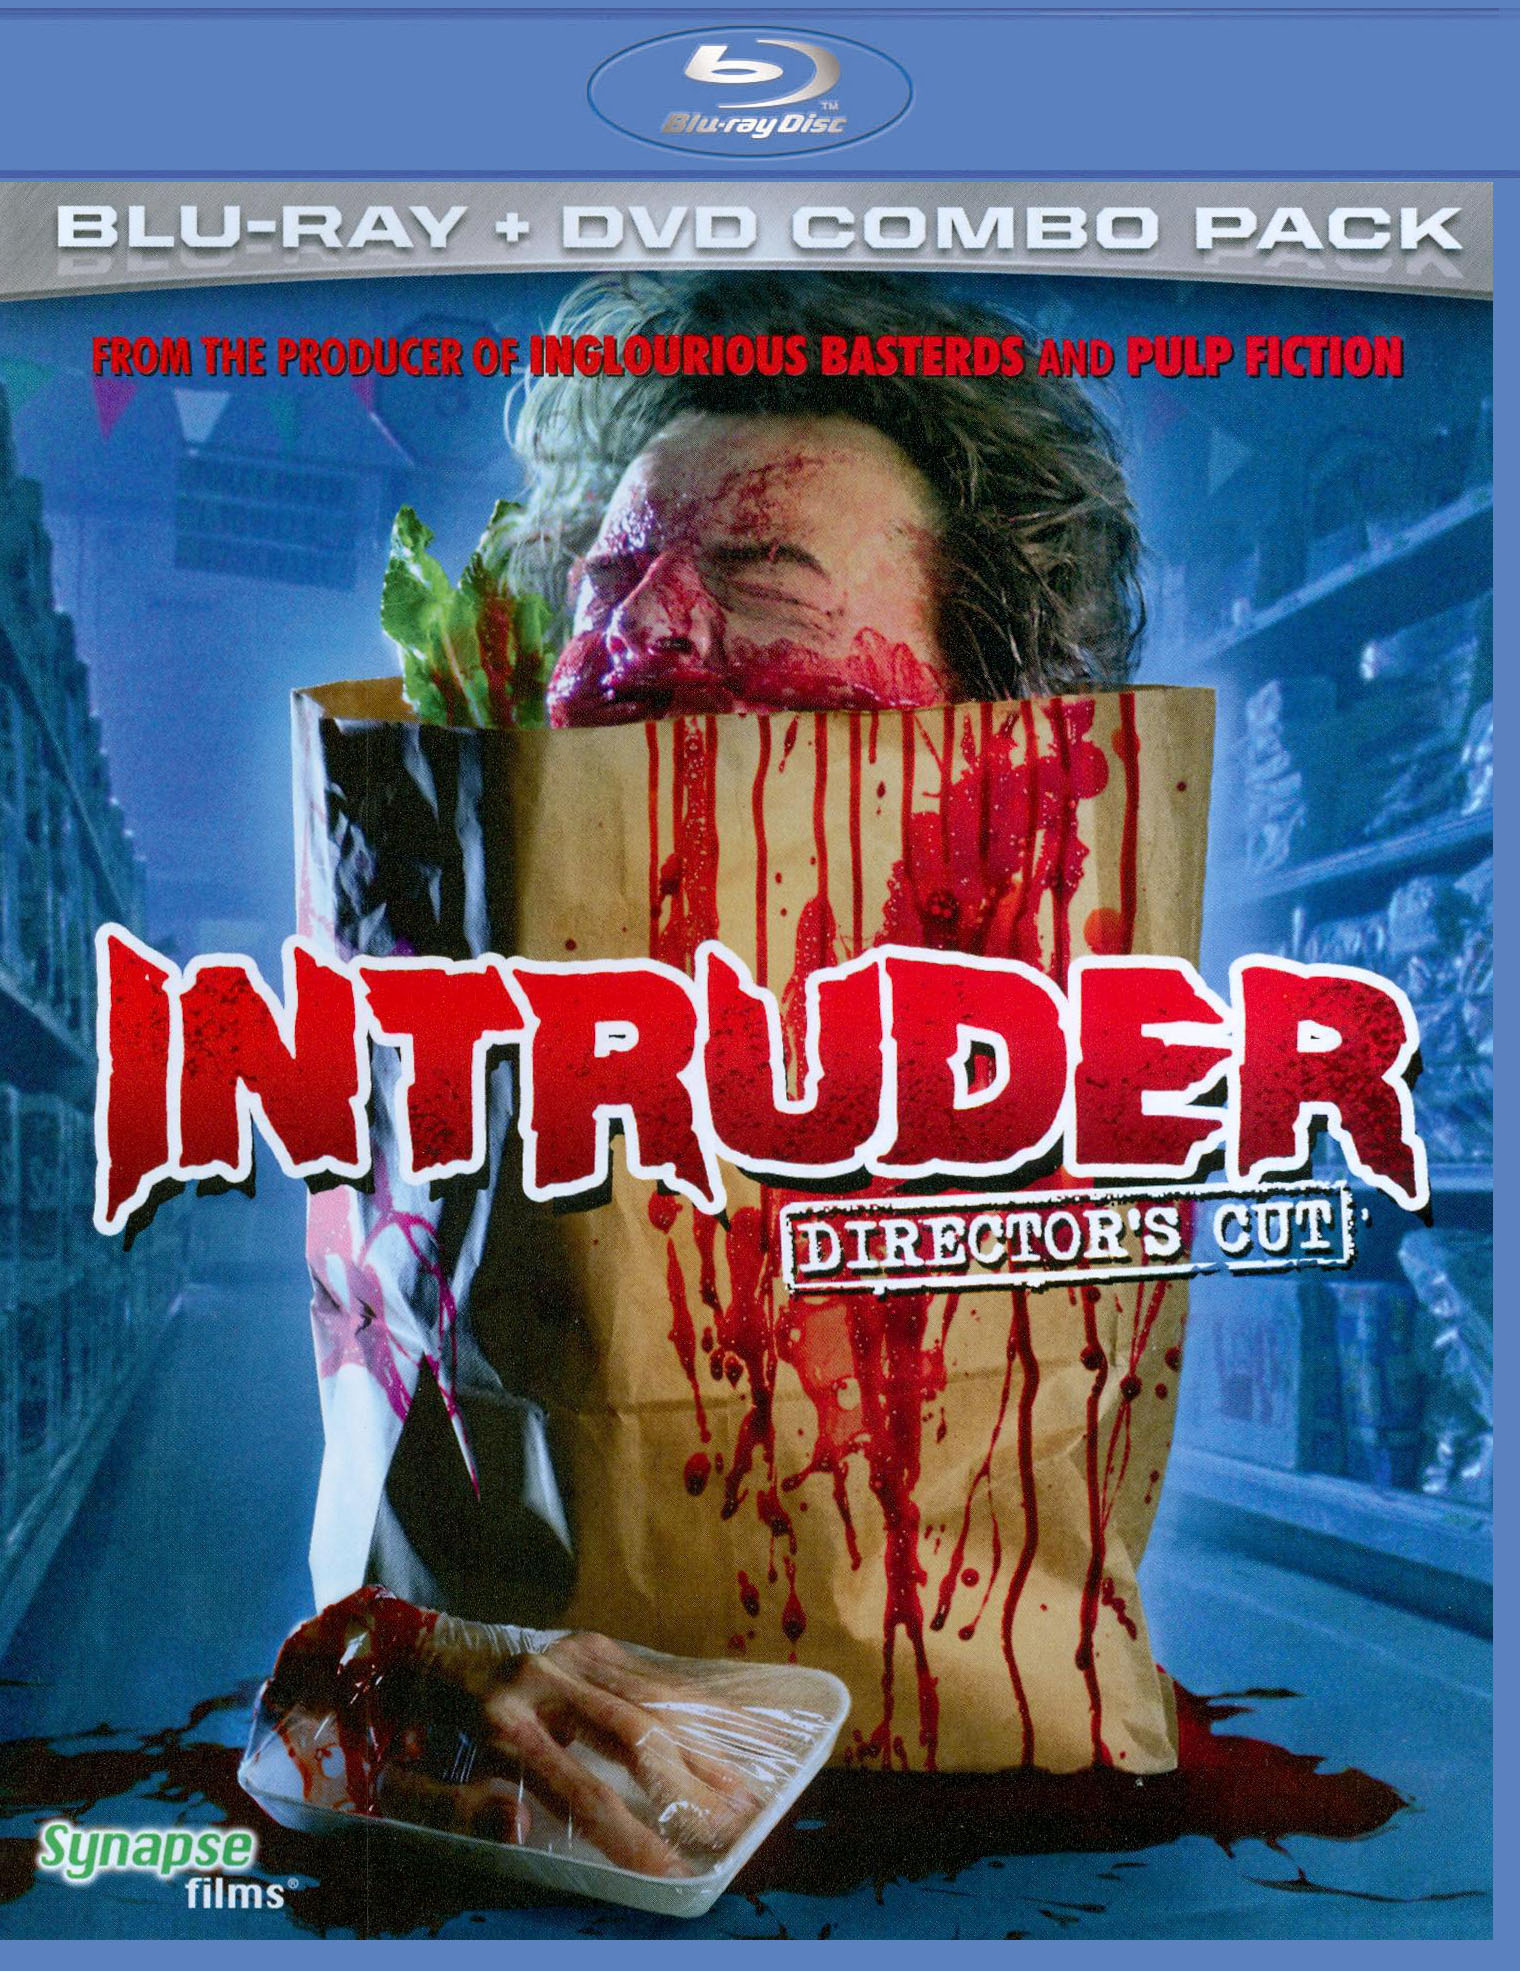 INTRUDERS From the Writer & Producer of X FILES BBC TV Series 2-Disc DVD  SET NEW